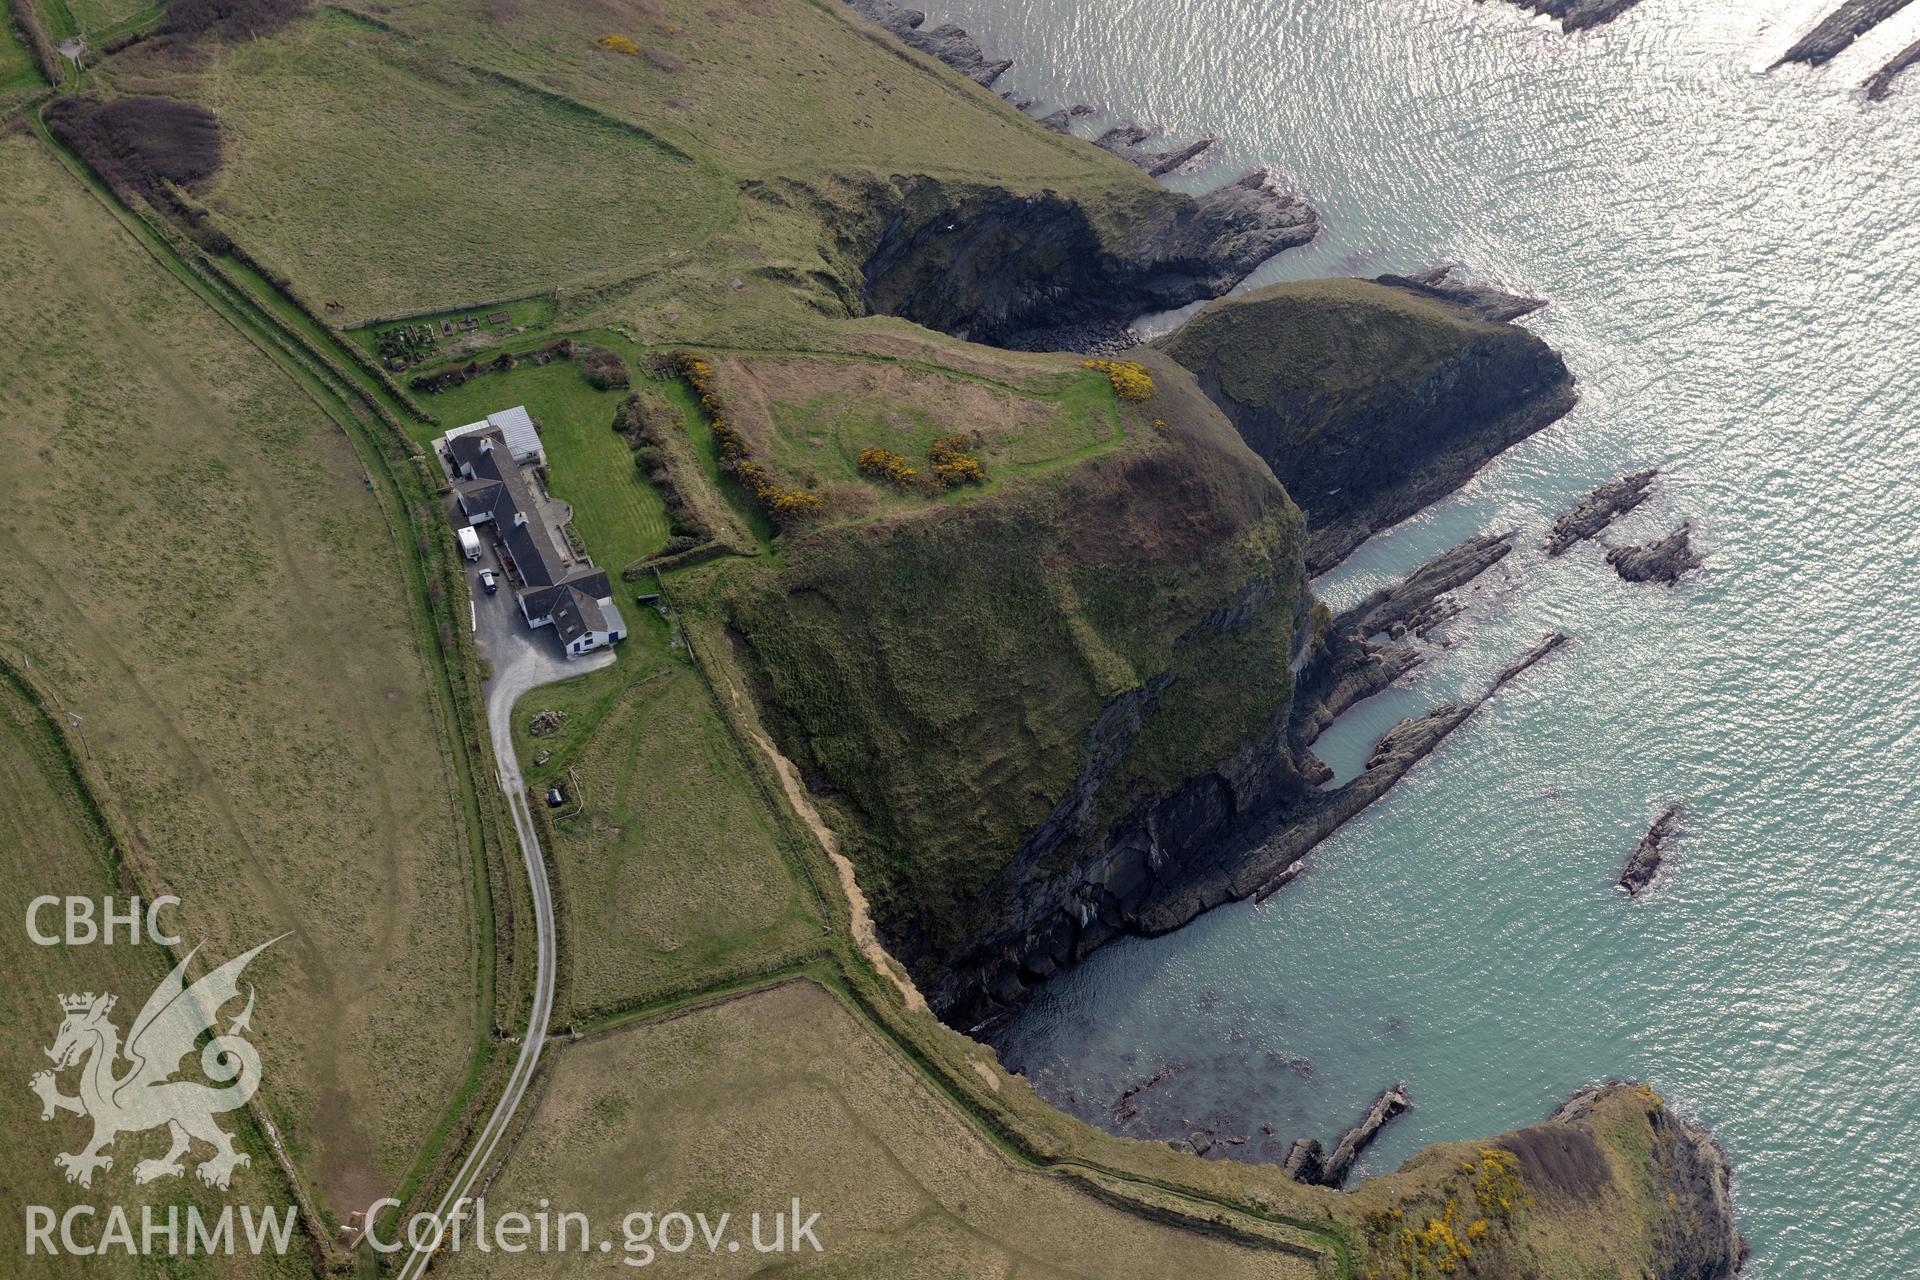 Aerial photography of Pen Castell promontory fort taken on 27th March 2017. Baseline aerial reconnaissance survey for the CHERISH Project. ? Crown: CHERISH PROJECT 2019. Produced with EU funds through the Ireland Wales Co-operation Programme 2014-2020. All material made freely available through the Open Government Licence.